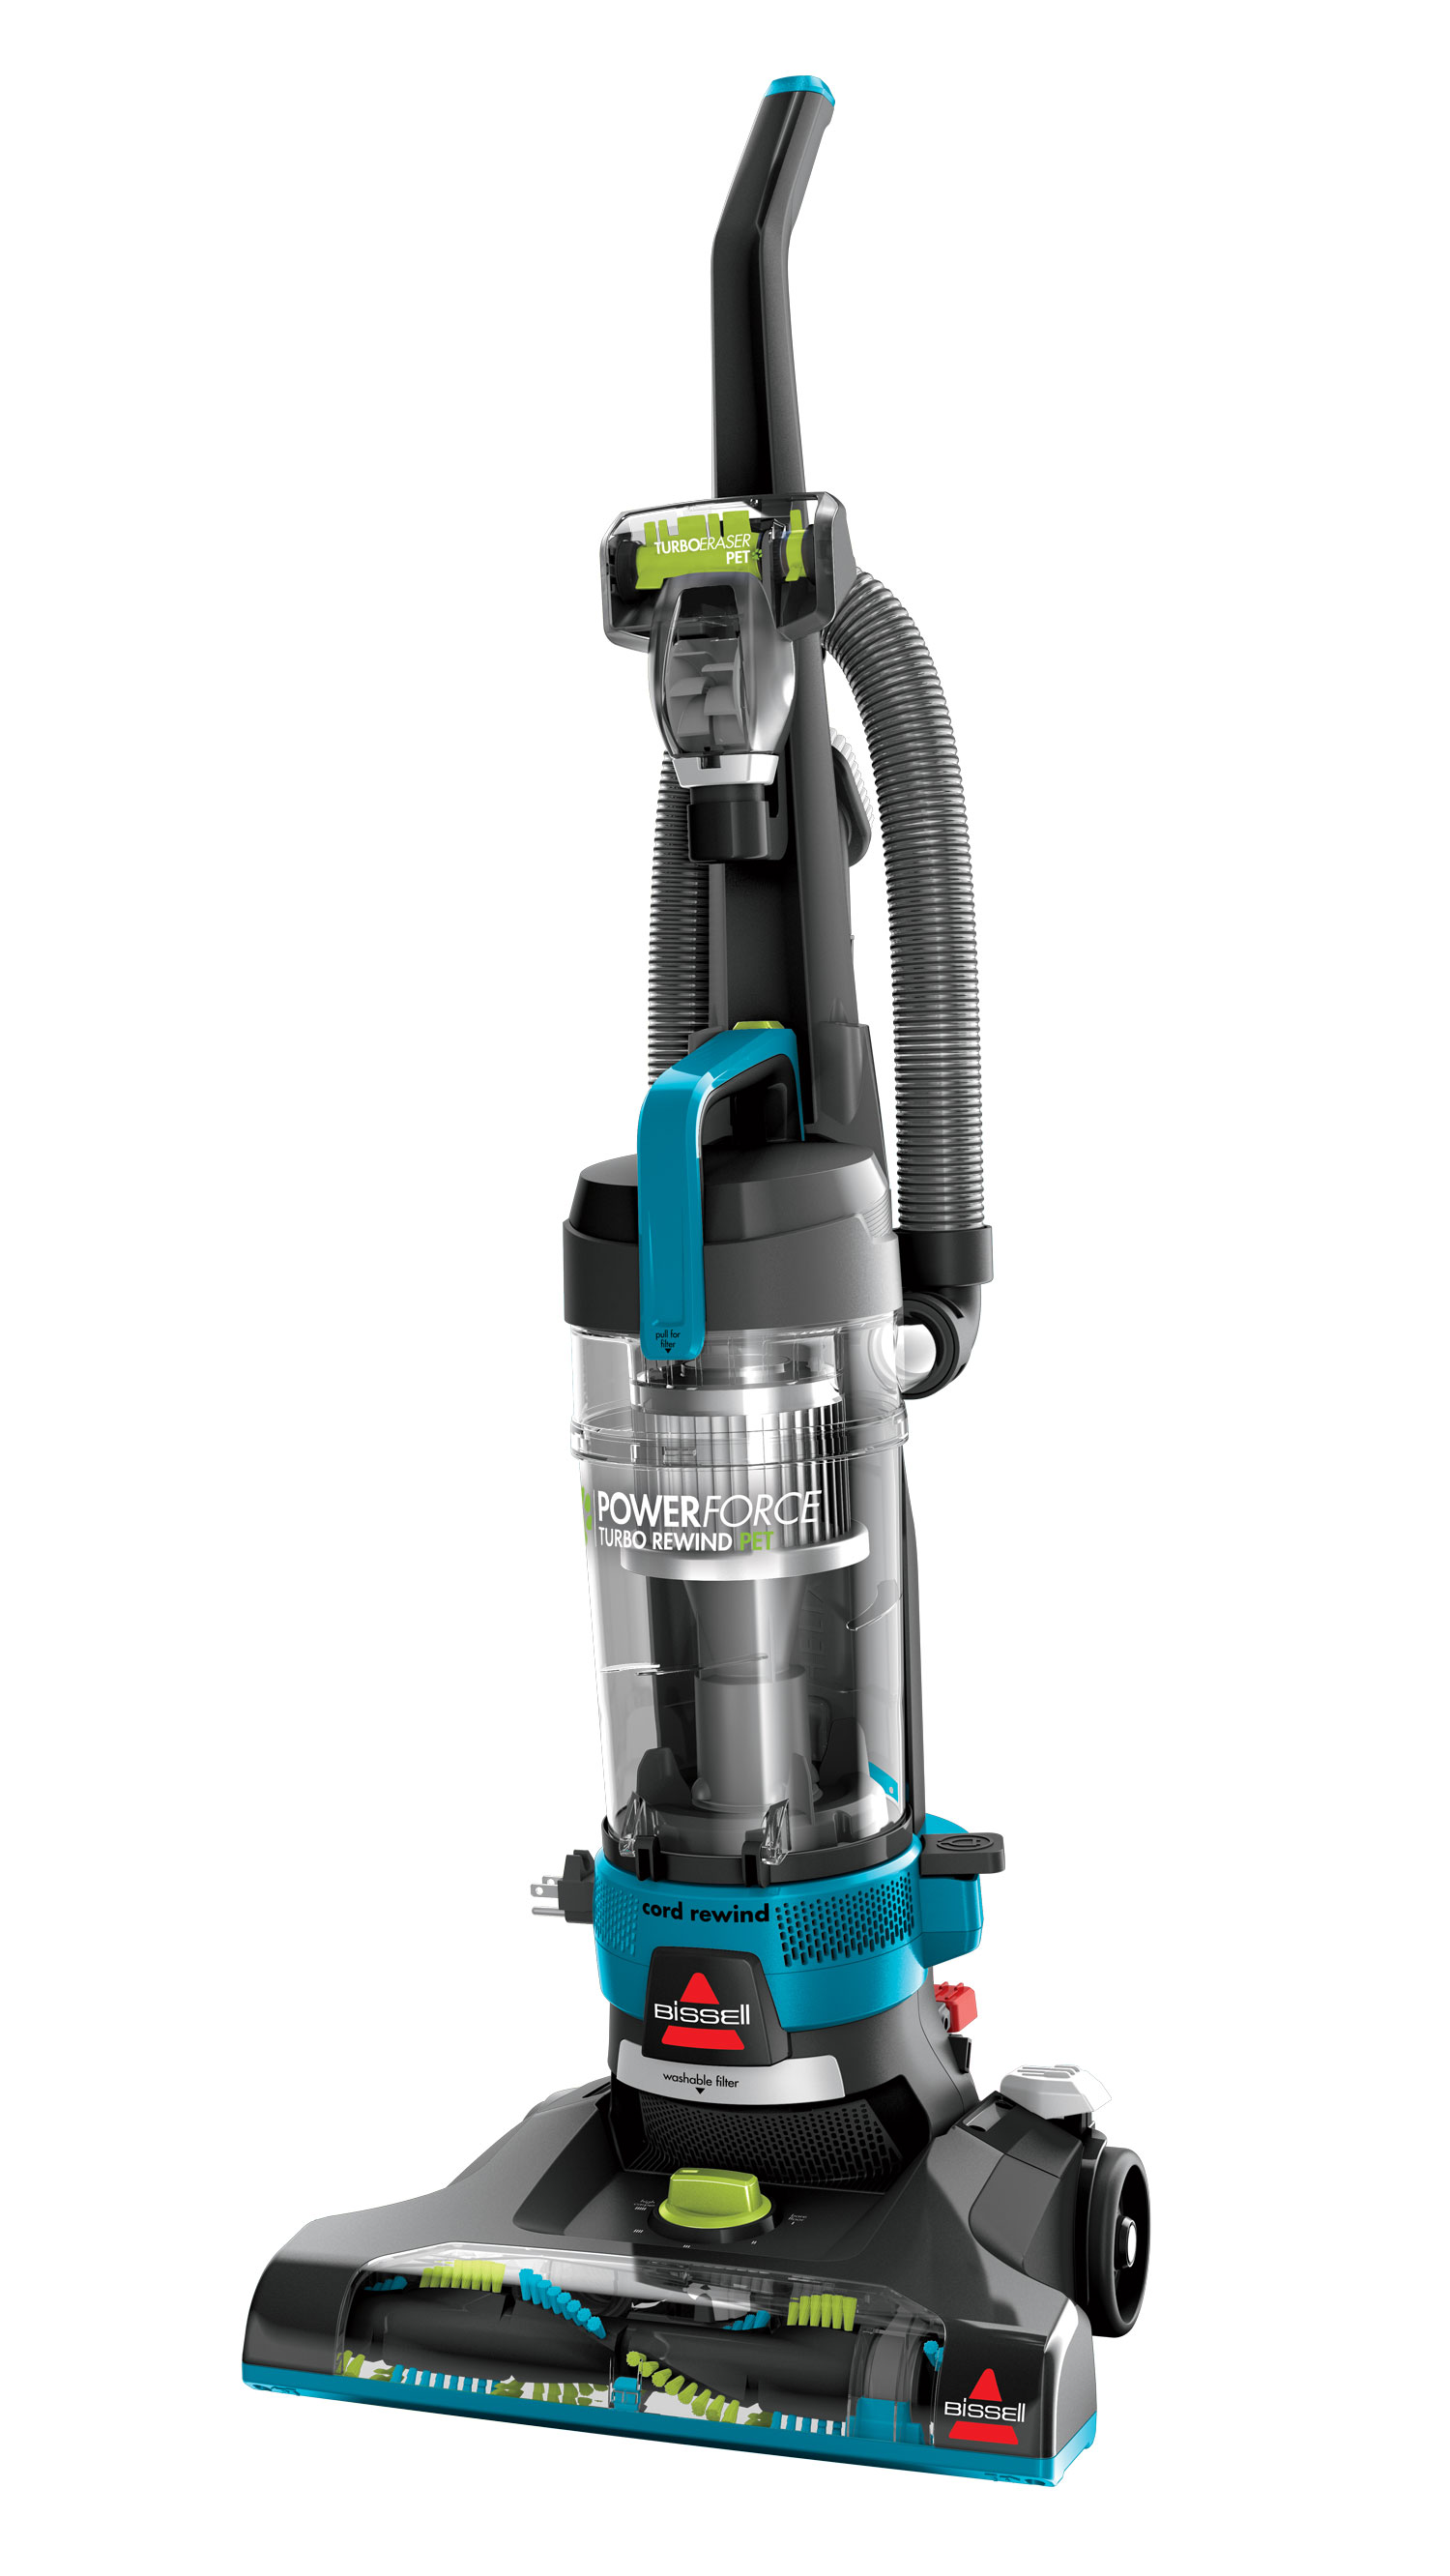 BISSELL Power Force Helix Turbo Rewind Pet Bagless Vacuum, 2692 - image 2 of 9